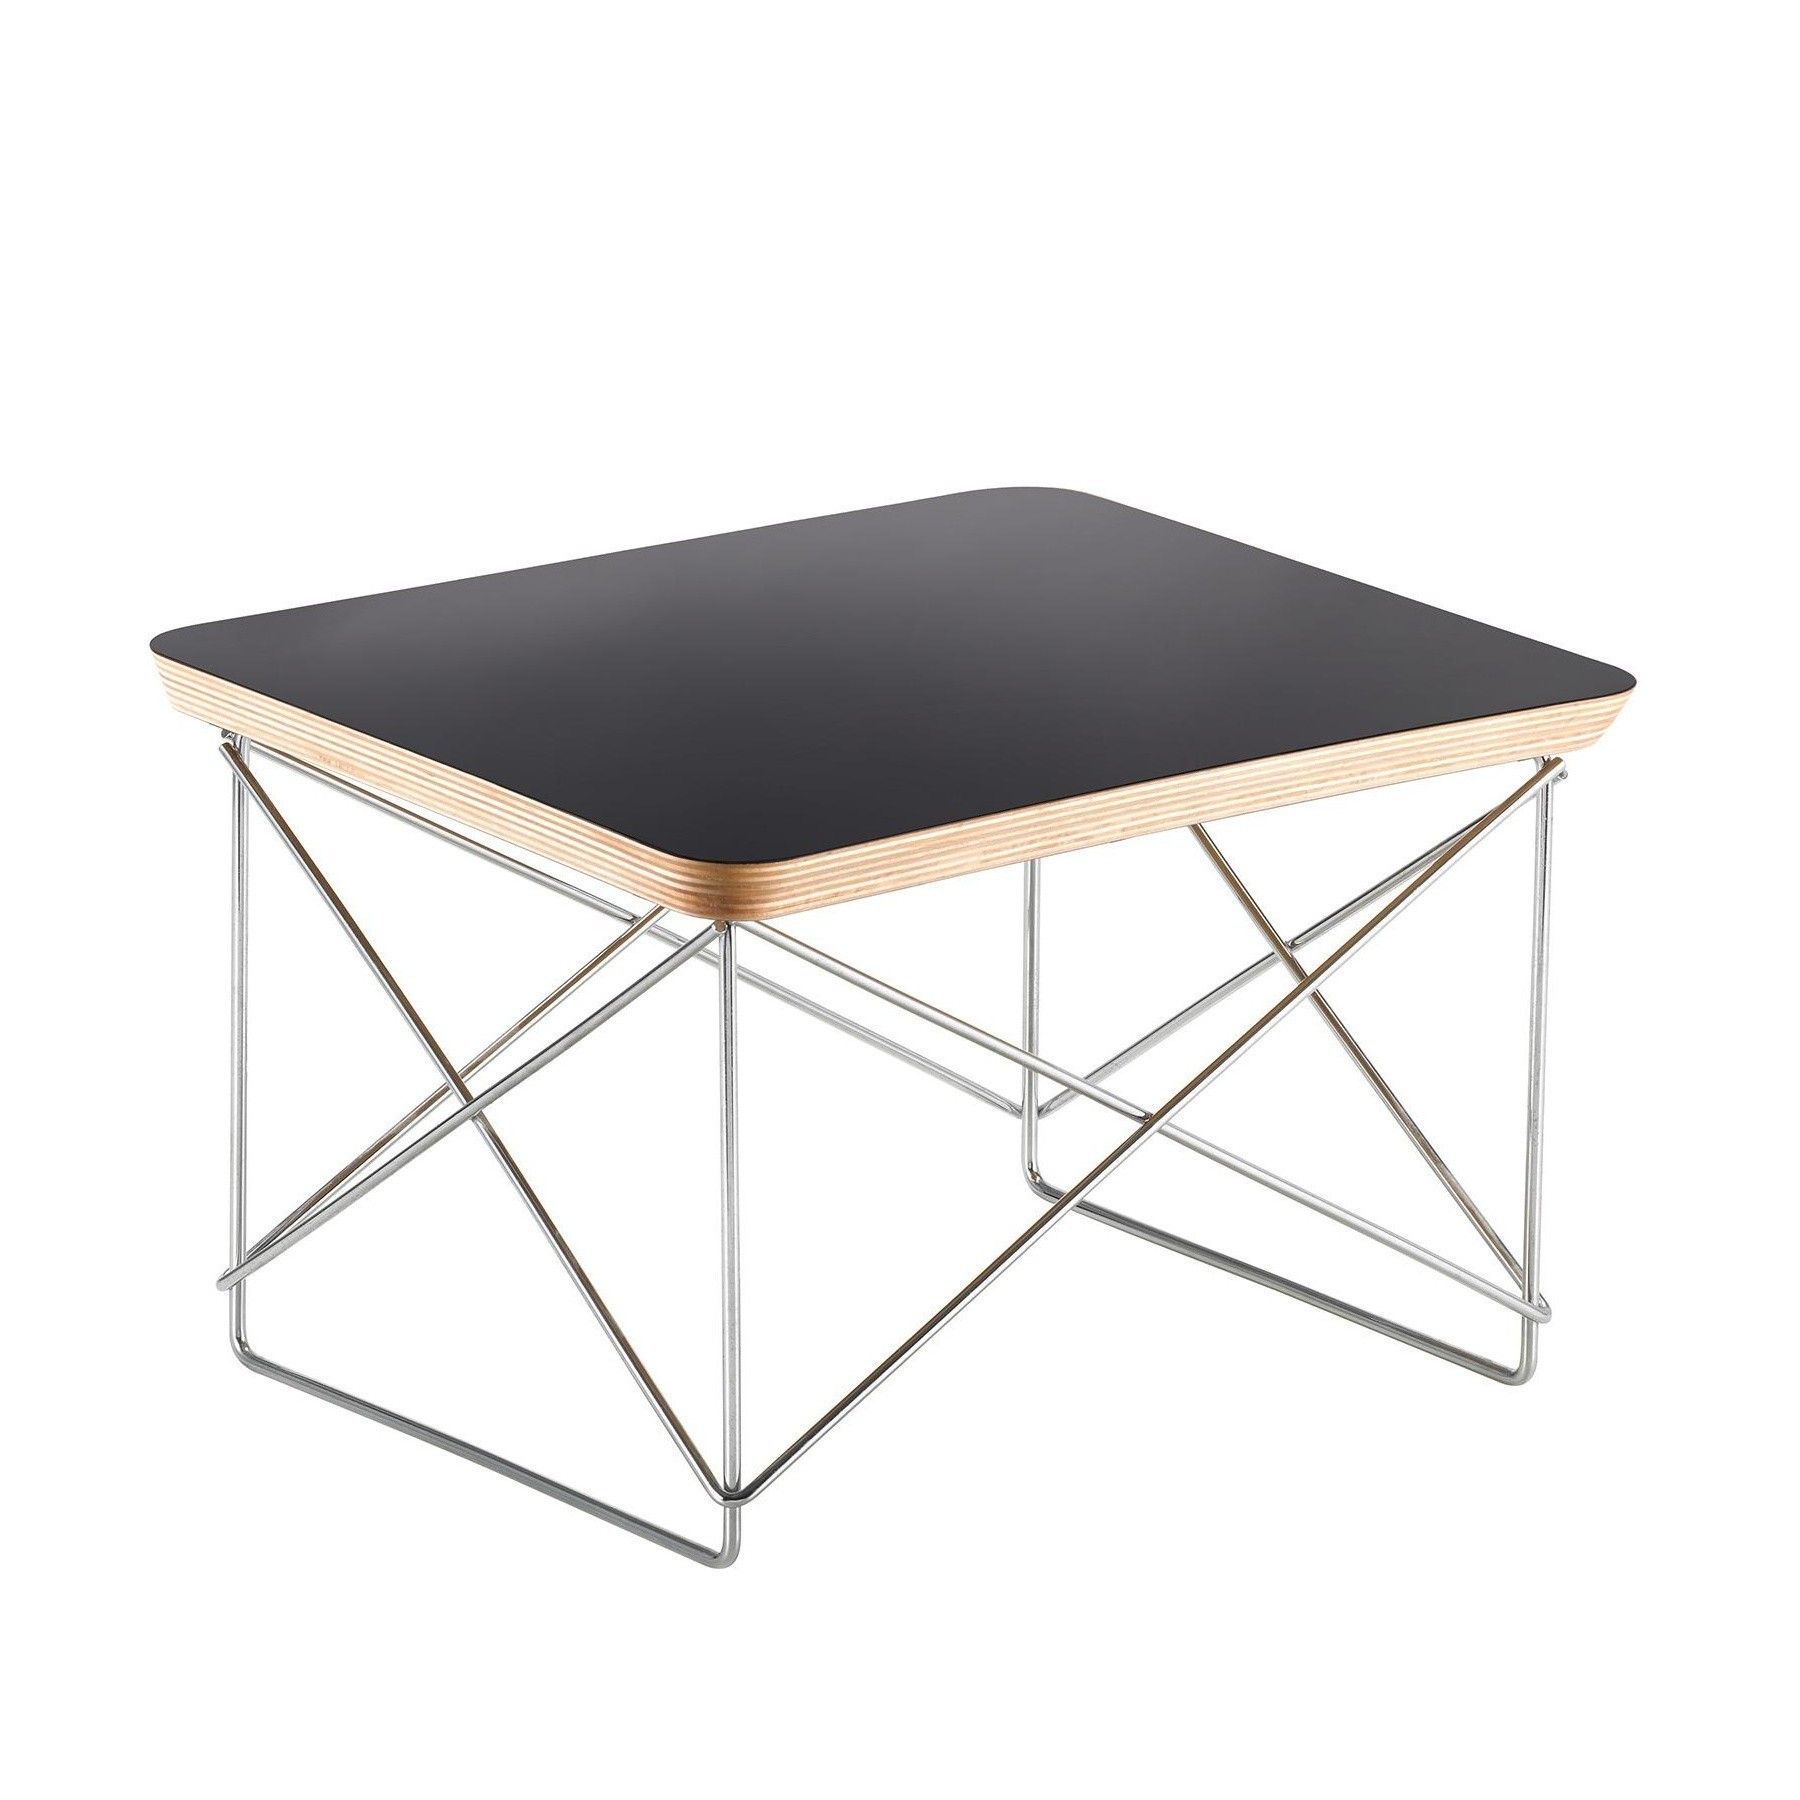 Vitra Occasional Table Ltr Coffee Table | Deplain Pertaining To Occasional Coffee Tables (View 16 of 20)